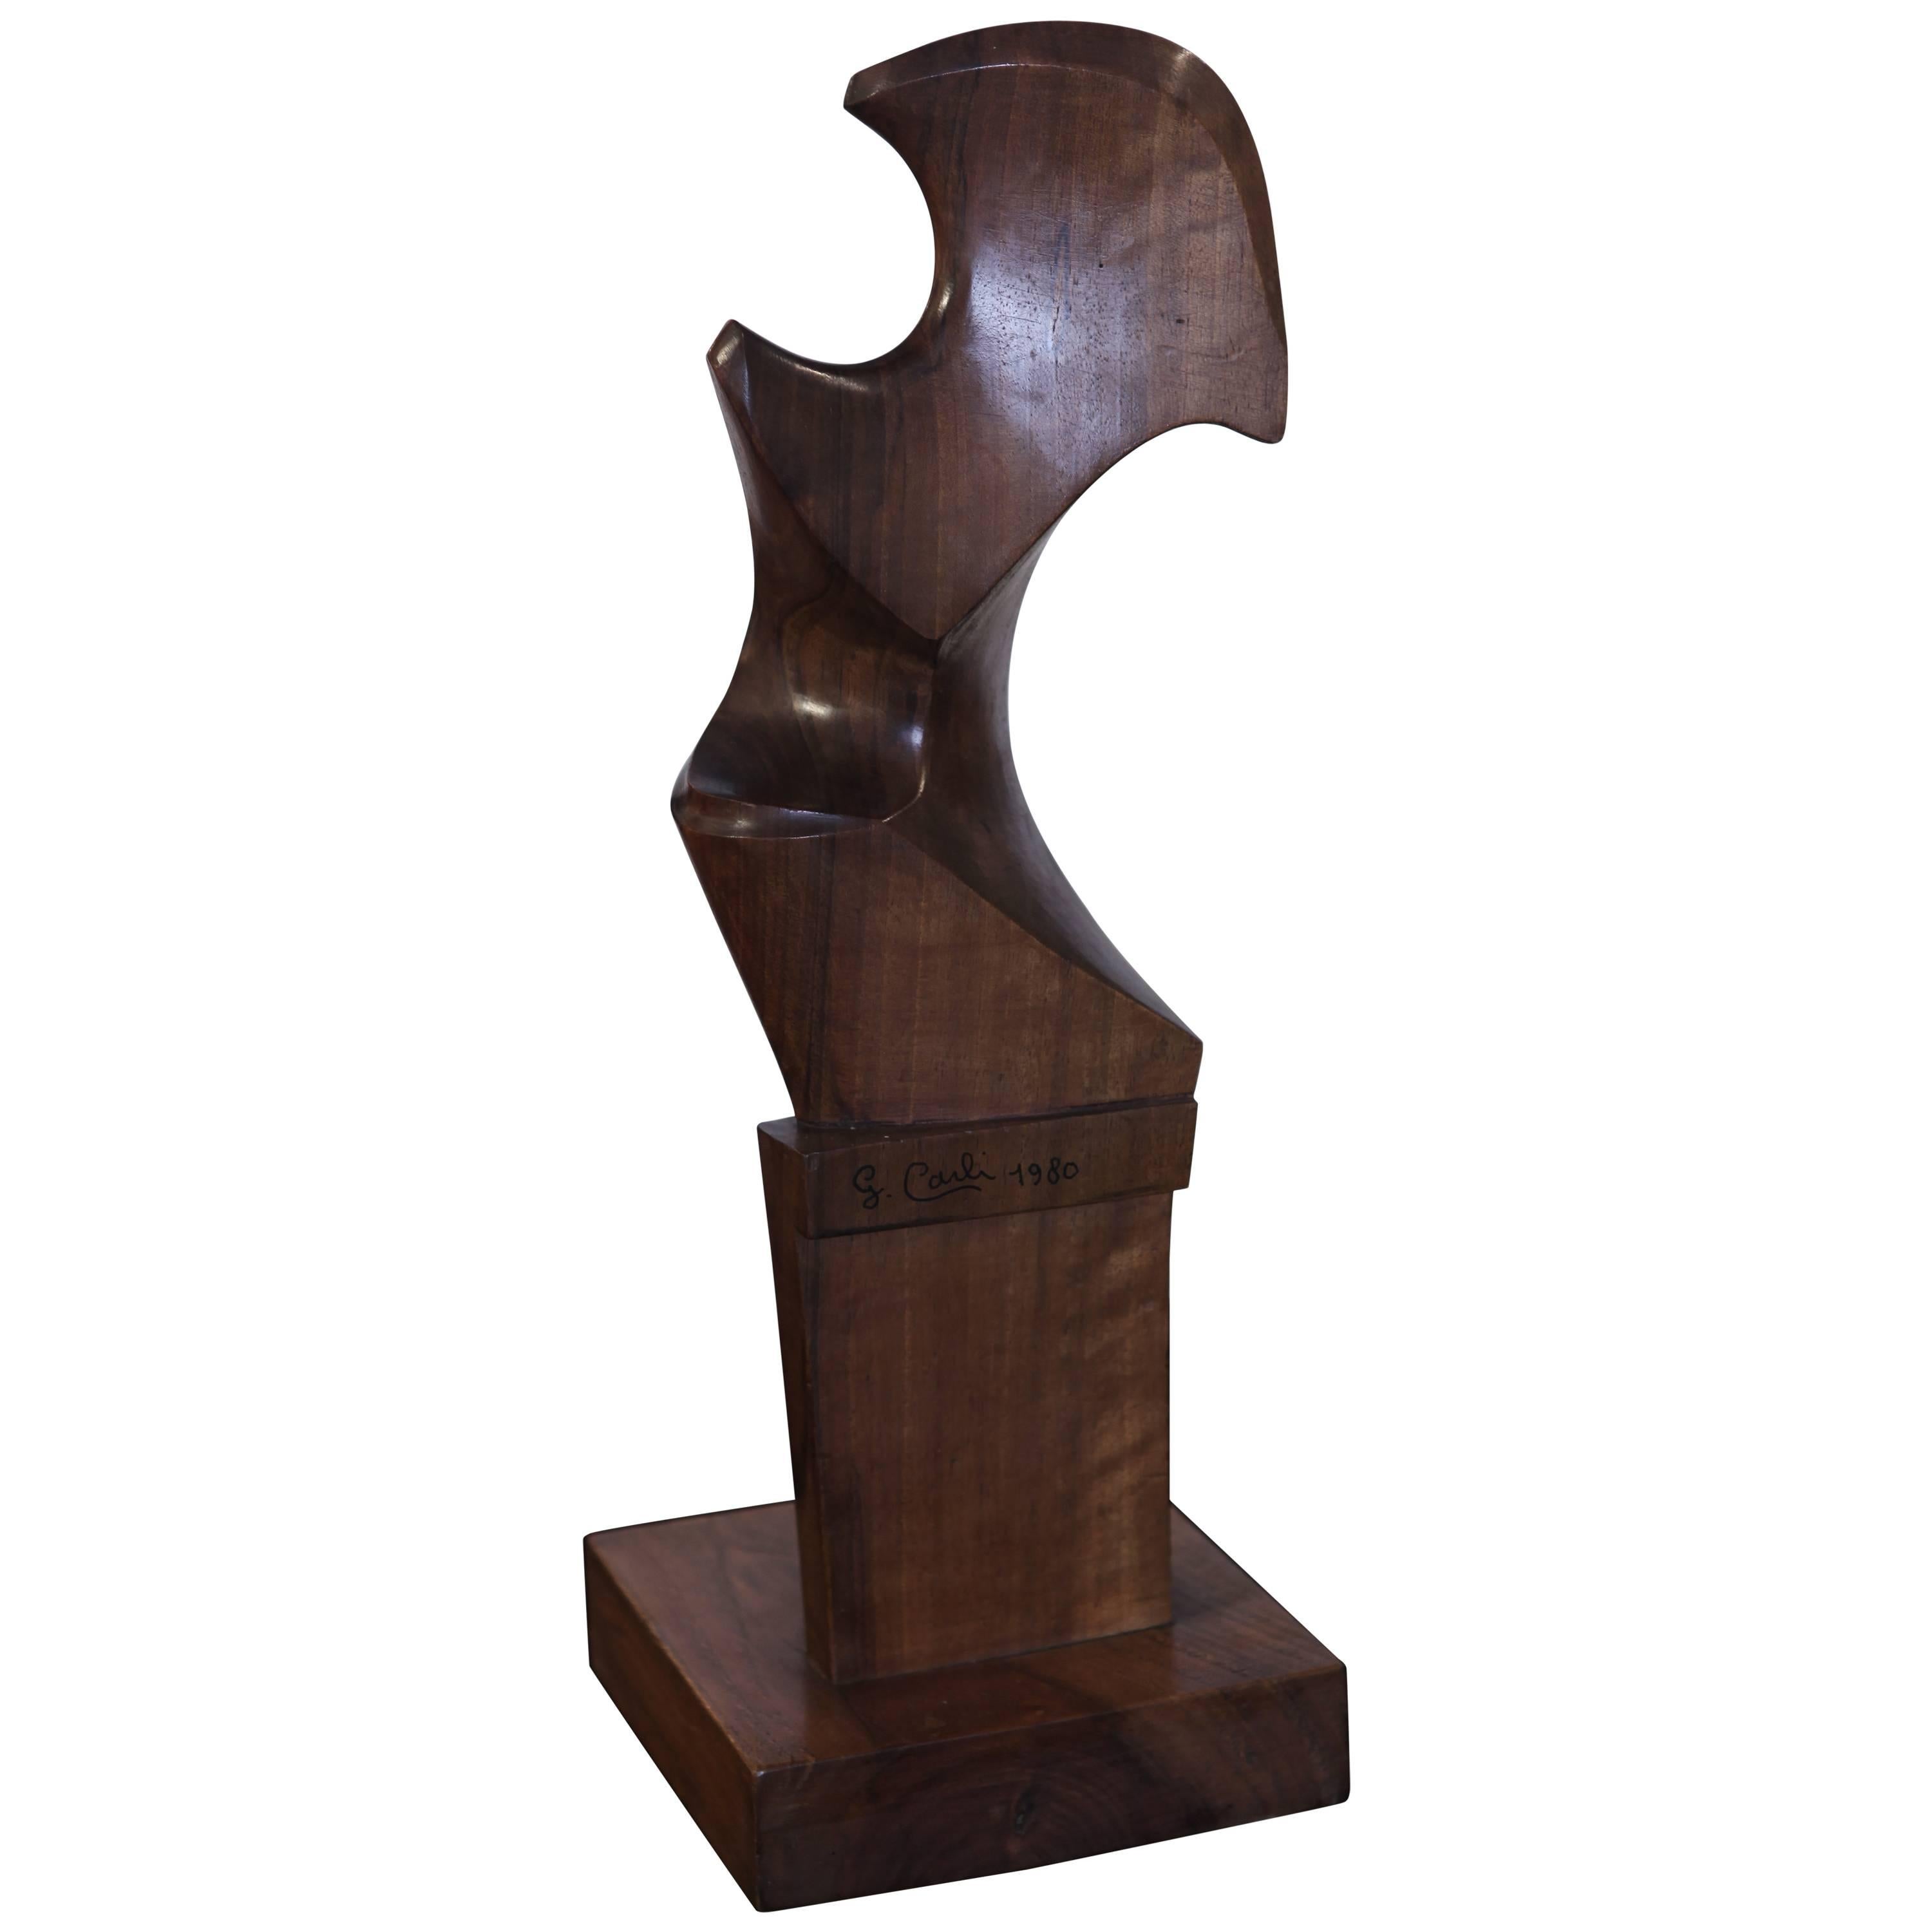 1980, Wood Sculpture by G. Carli